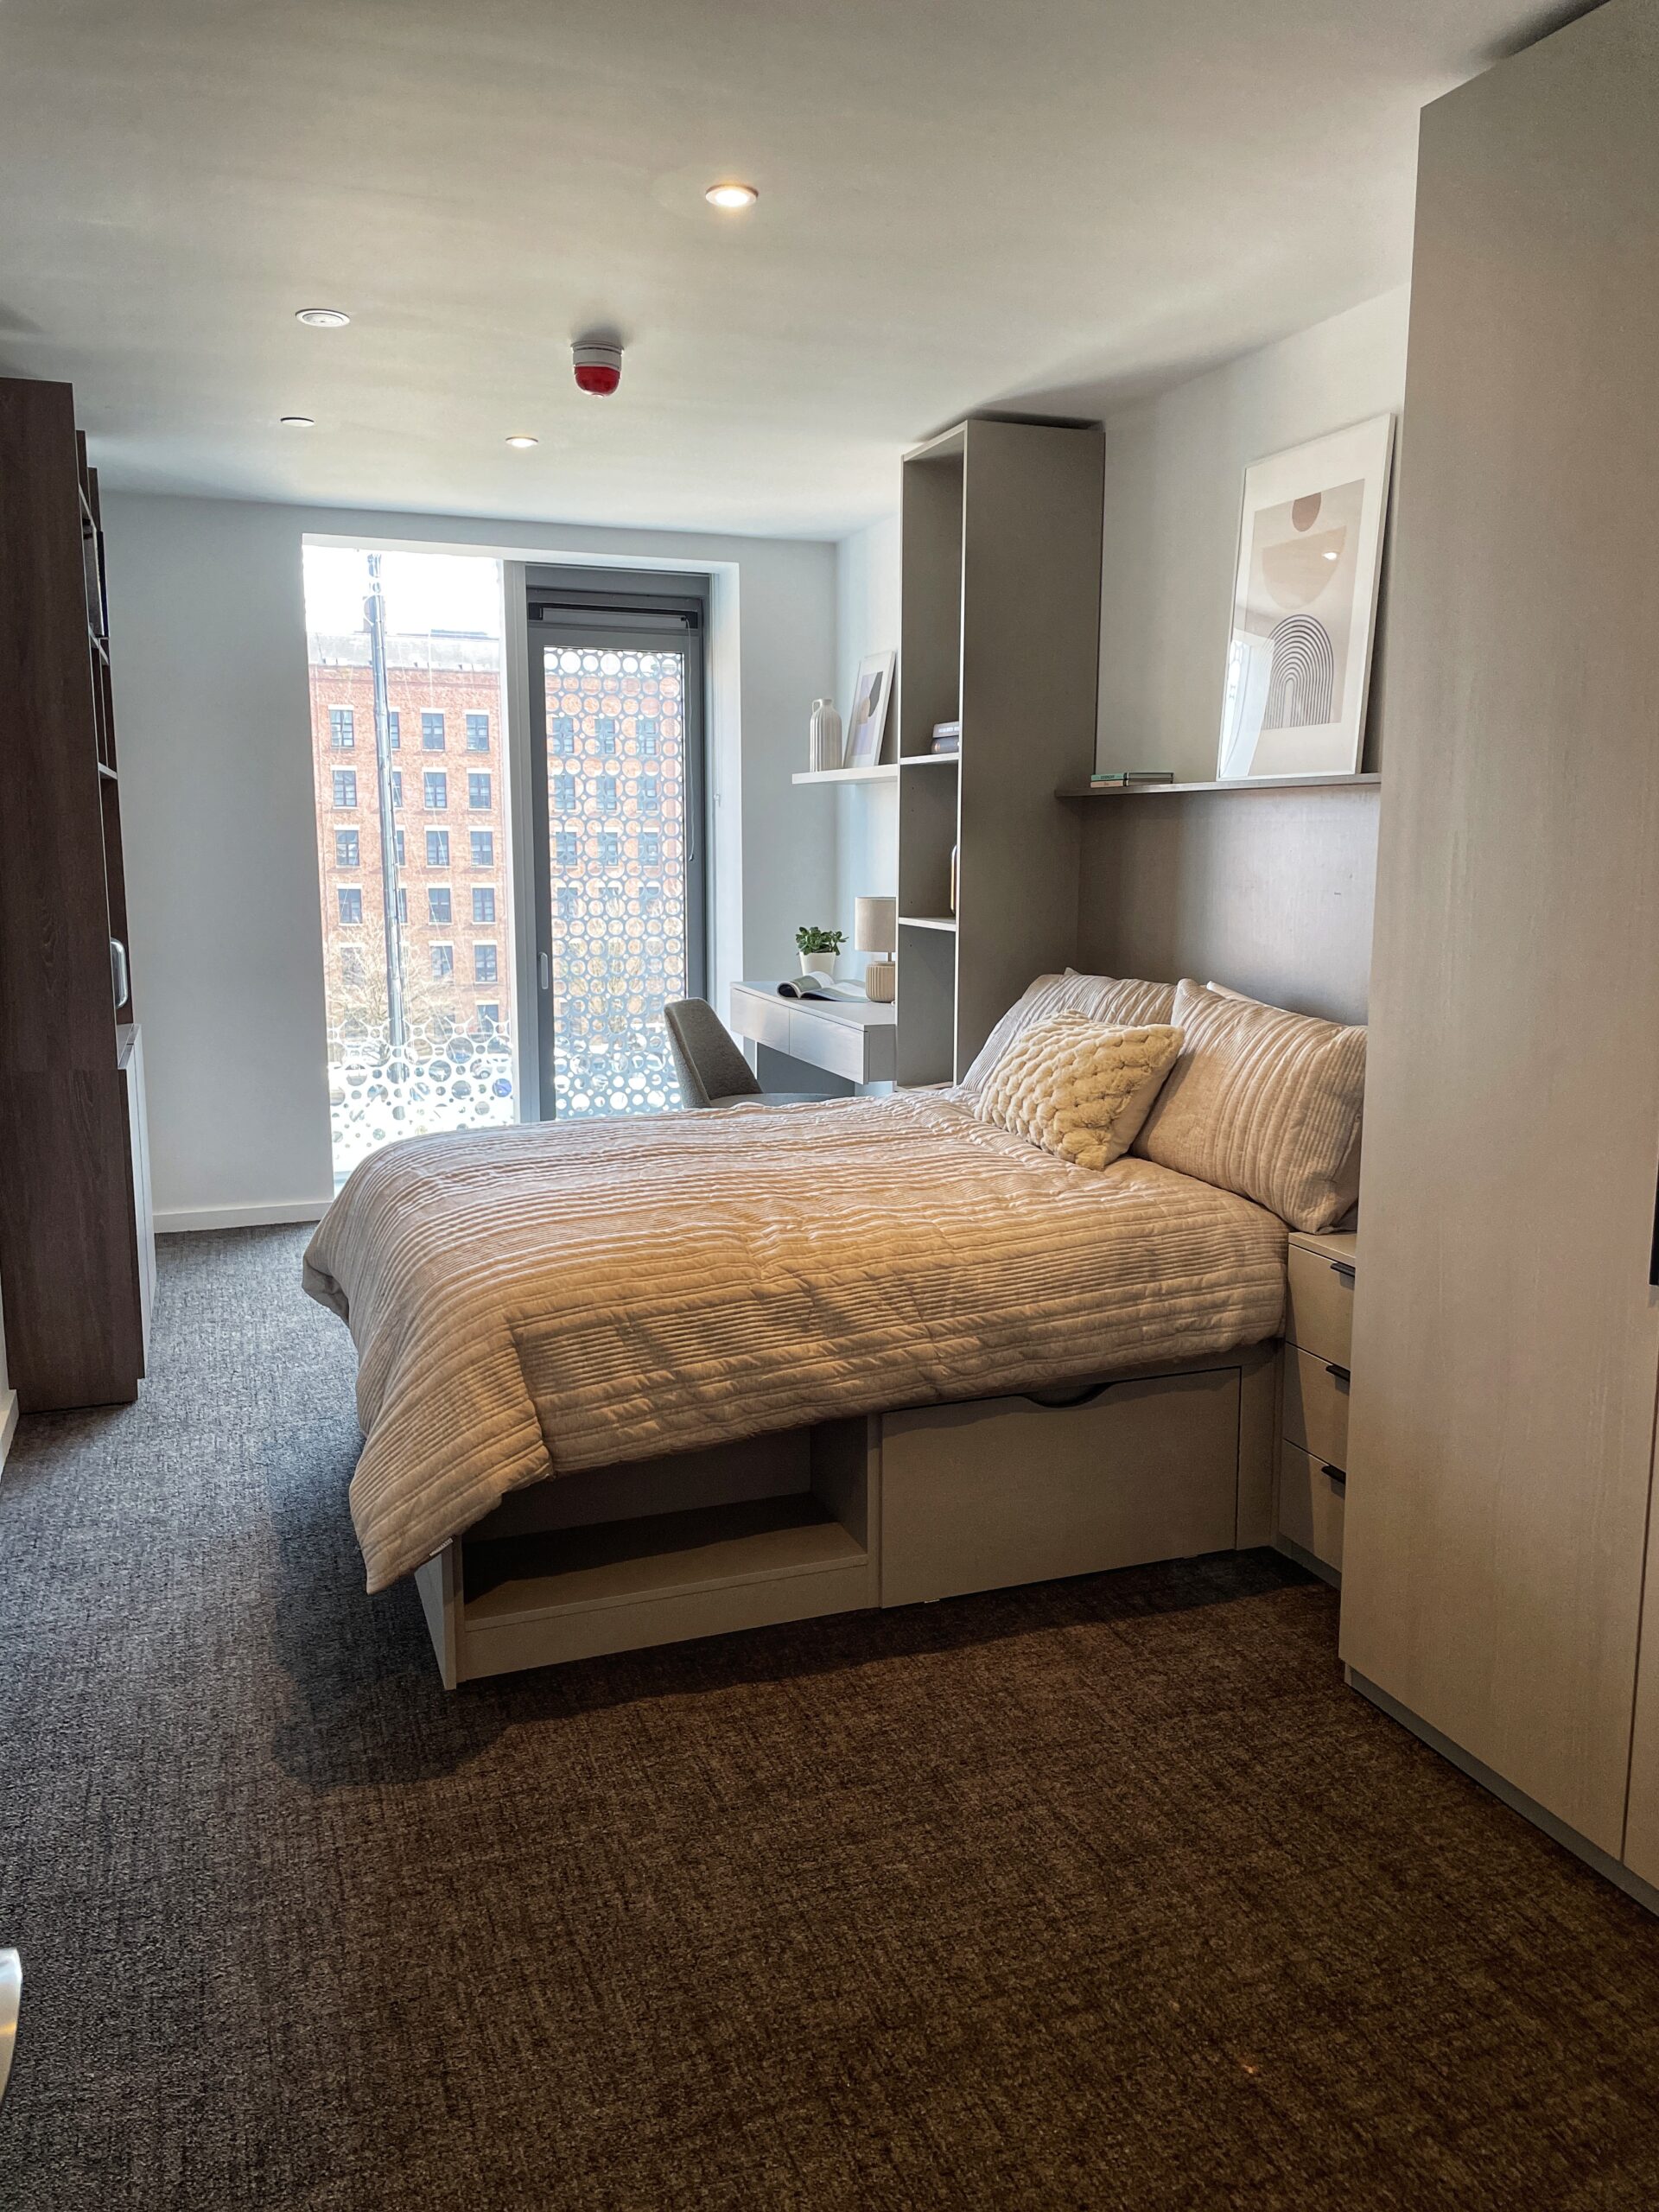 One of the double bedrooms in the co-living apartments at Square Gardens in Manchester. Credit: The Manc Group